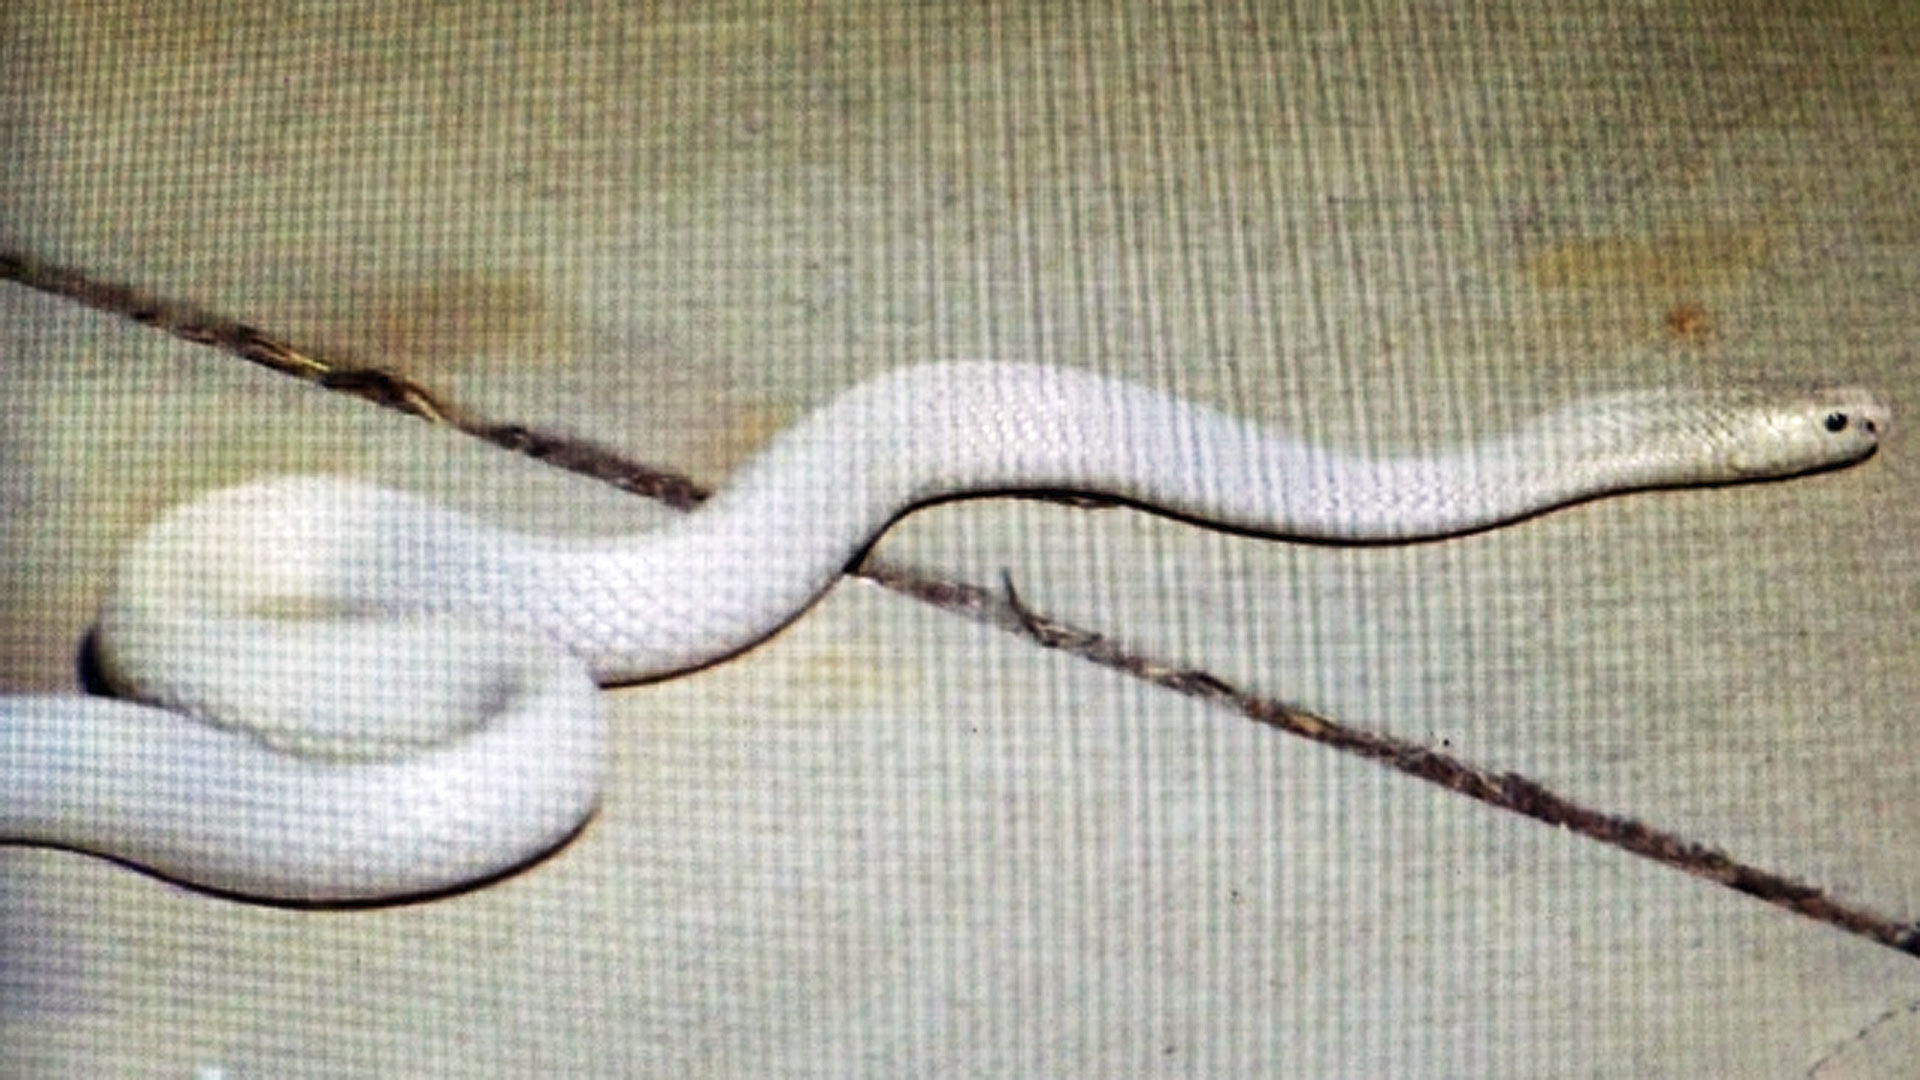 A picture of the cobra shortly after it was caught in Thousand Oaks on Thursday, Sept. 4, 2014. (Credit: KTLA)